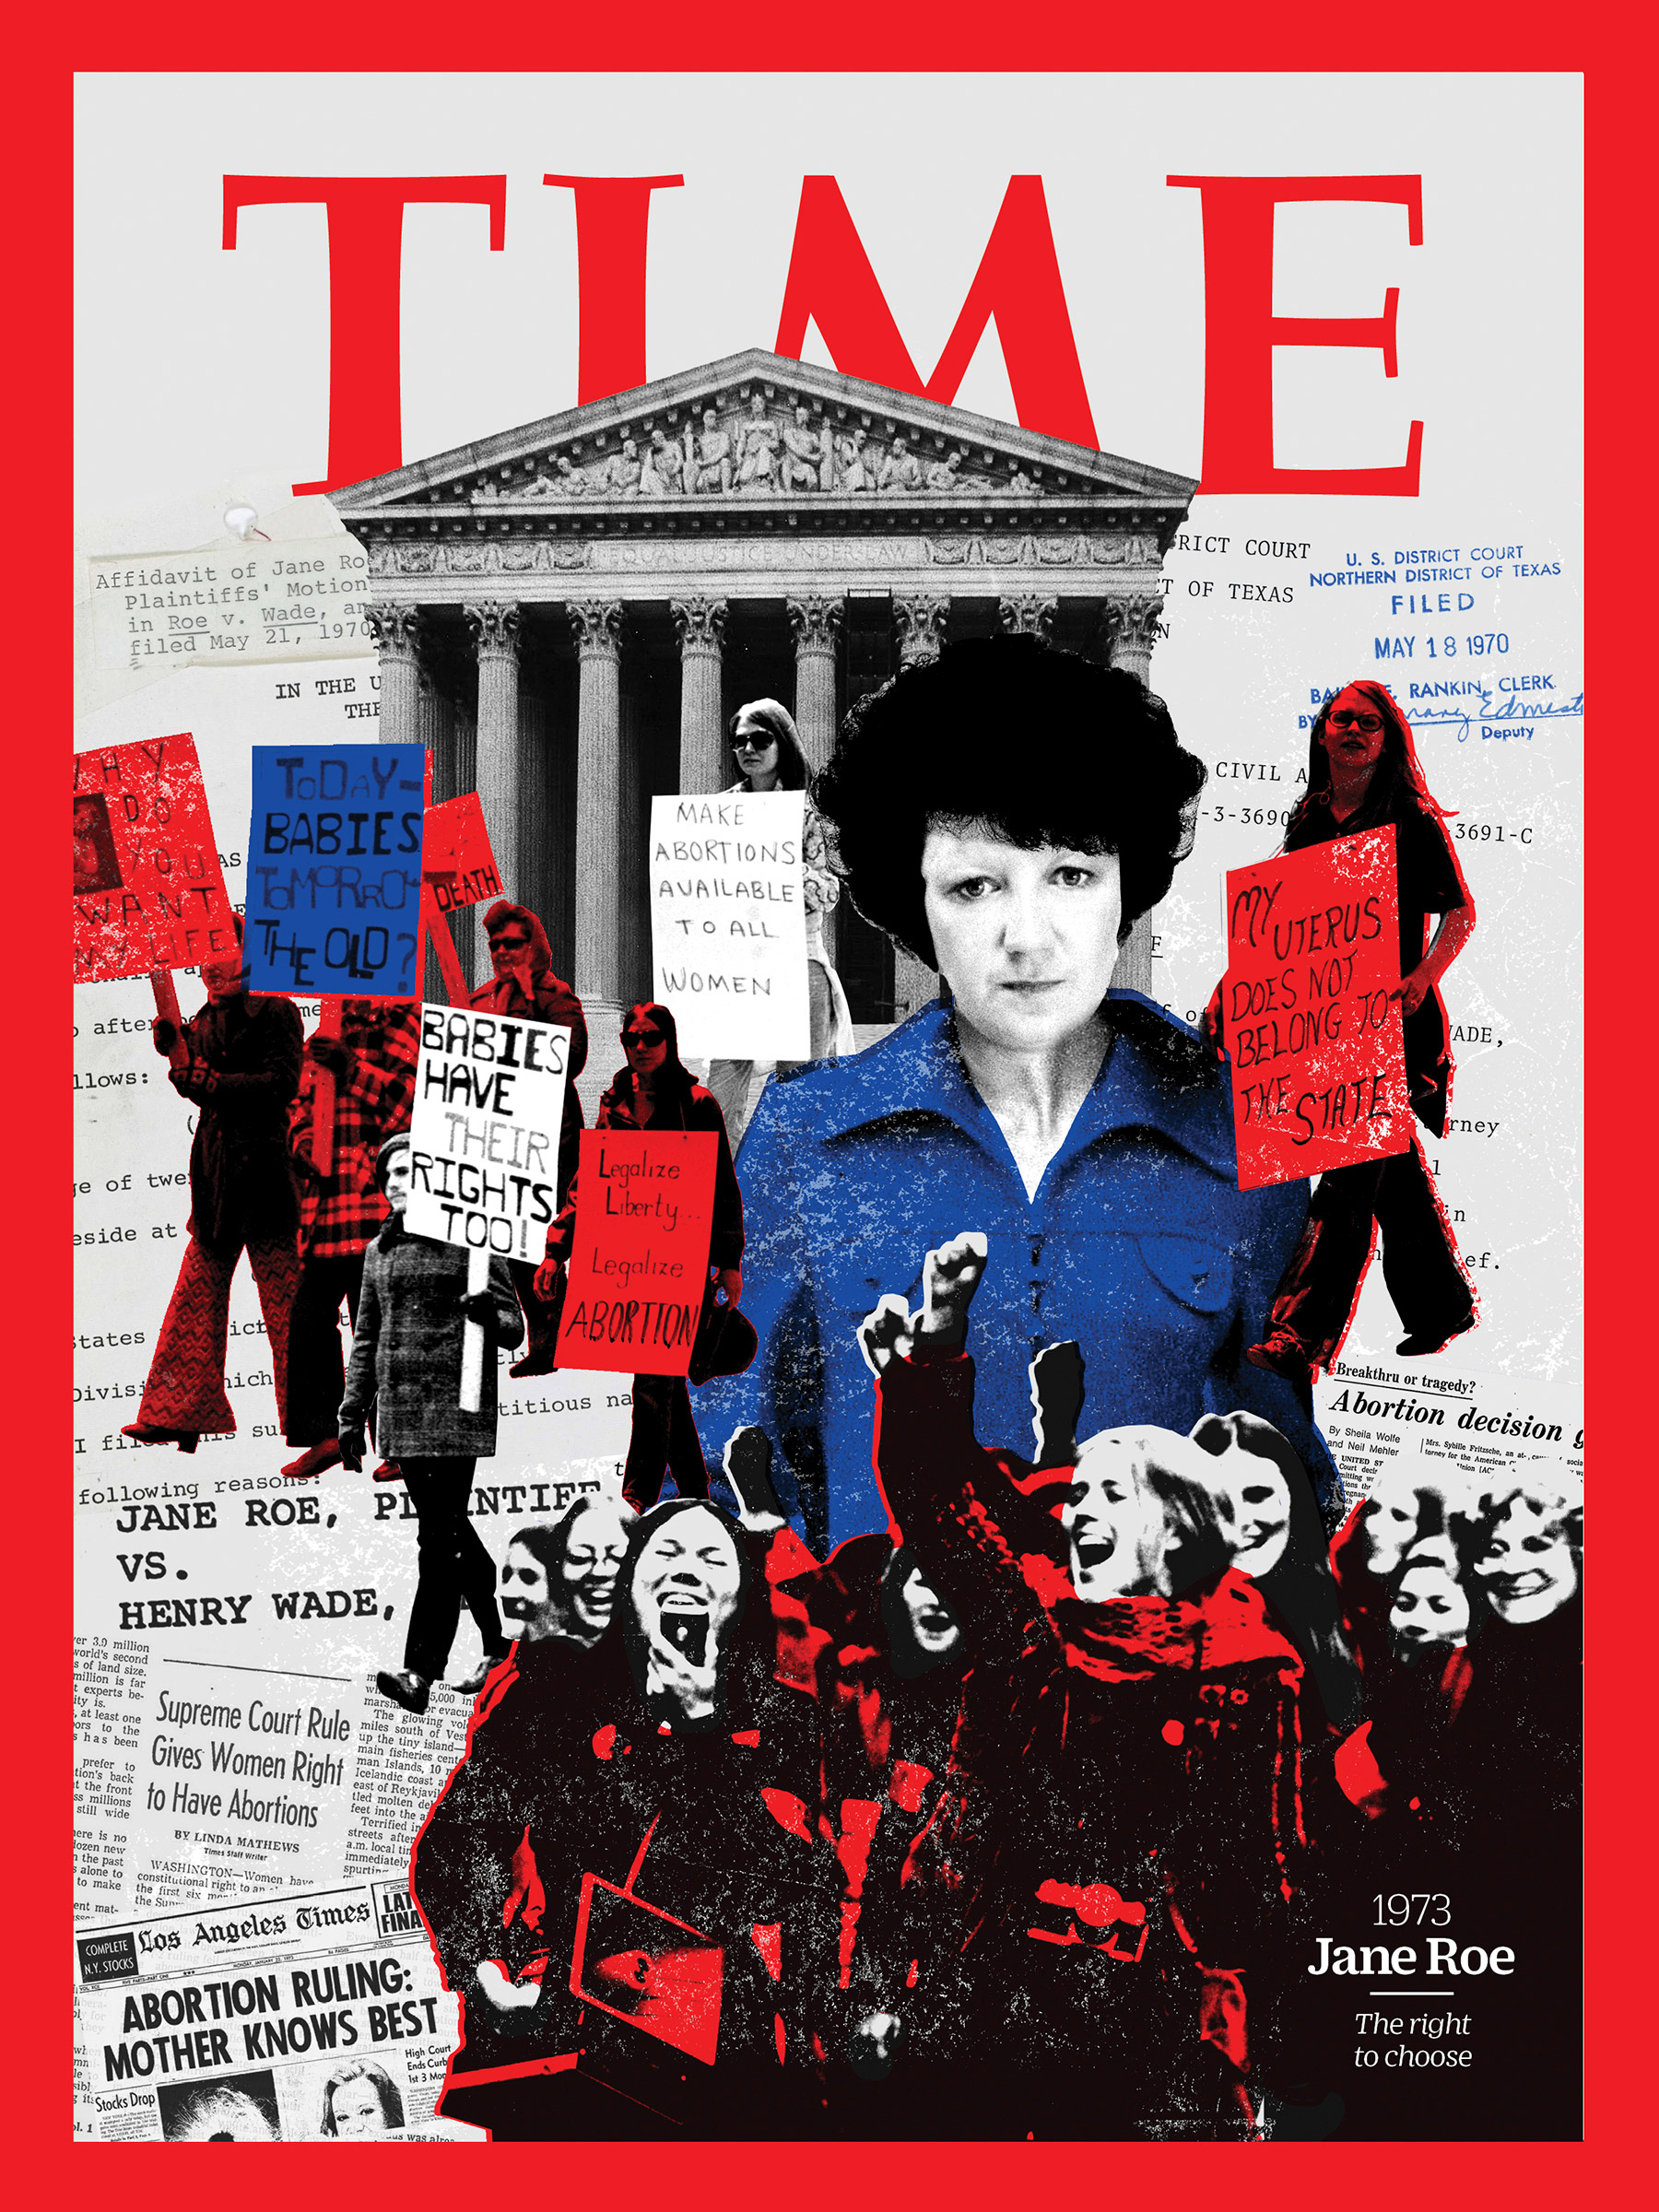 <a href="https://fineartamerica.com/featured/jane-roe-1973-time.html"><strong>Buy the cover art→</strong></a> (Illustration by Joe Magee for TIME; Getty (4); Redux)